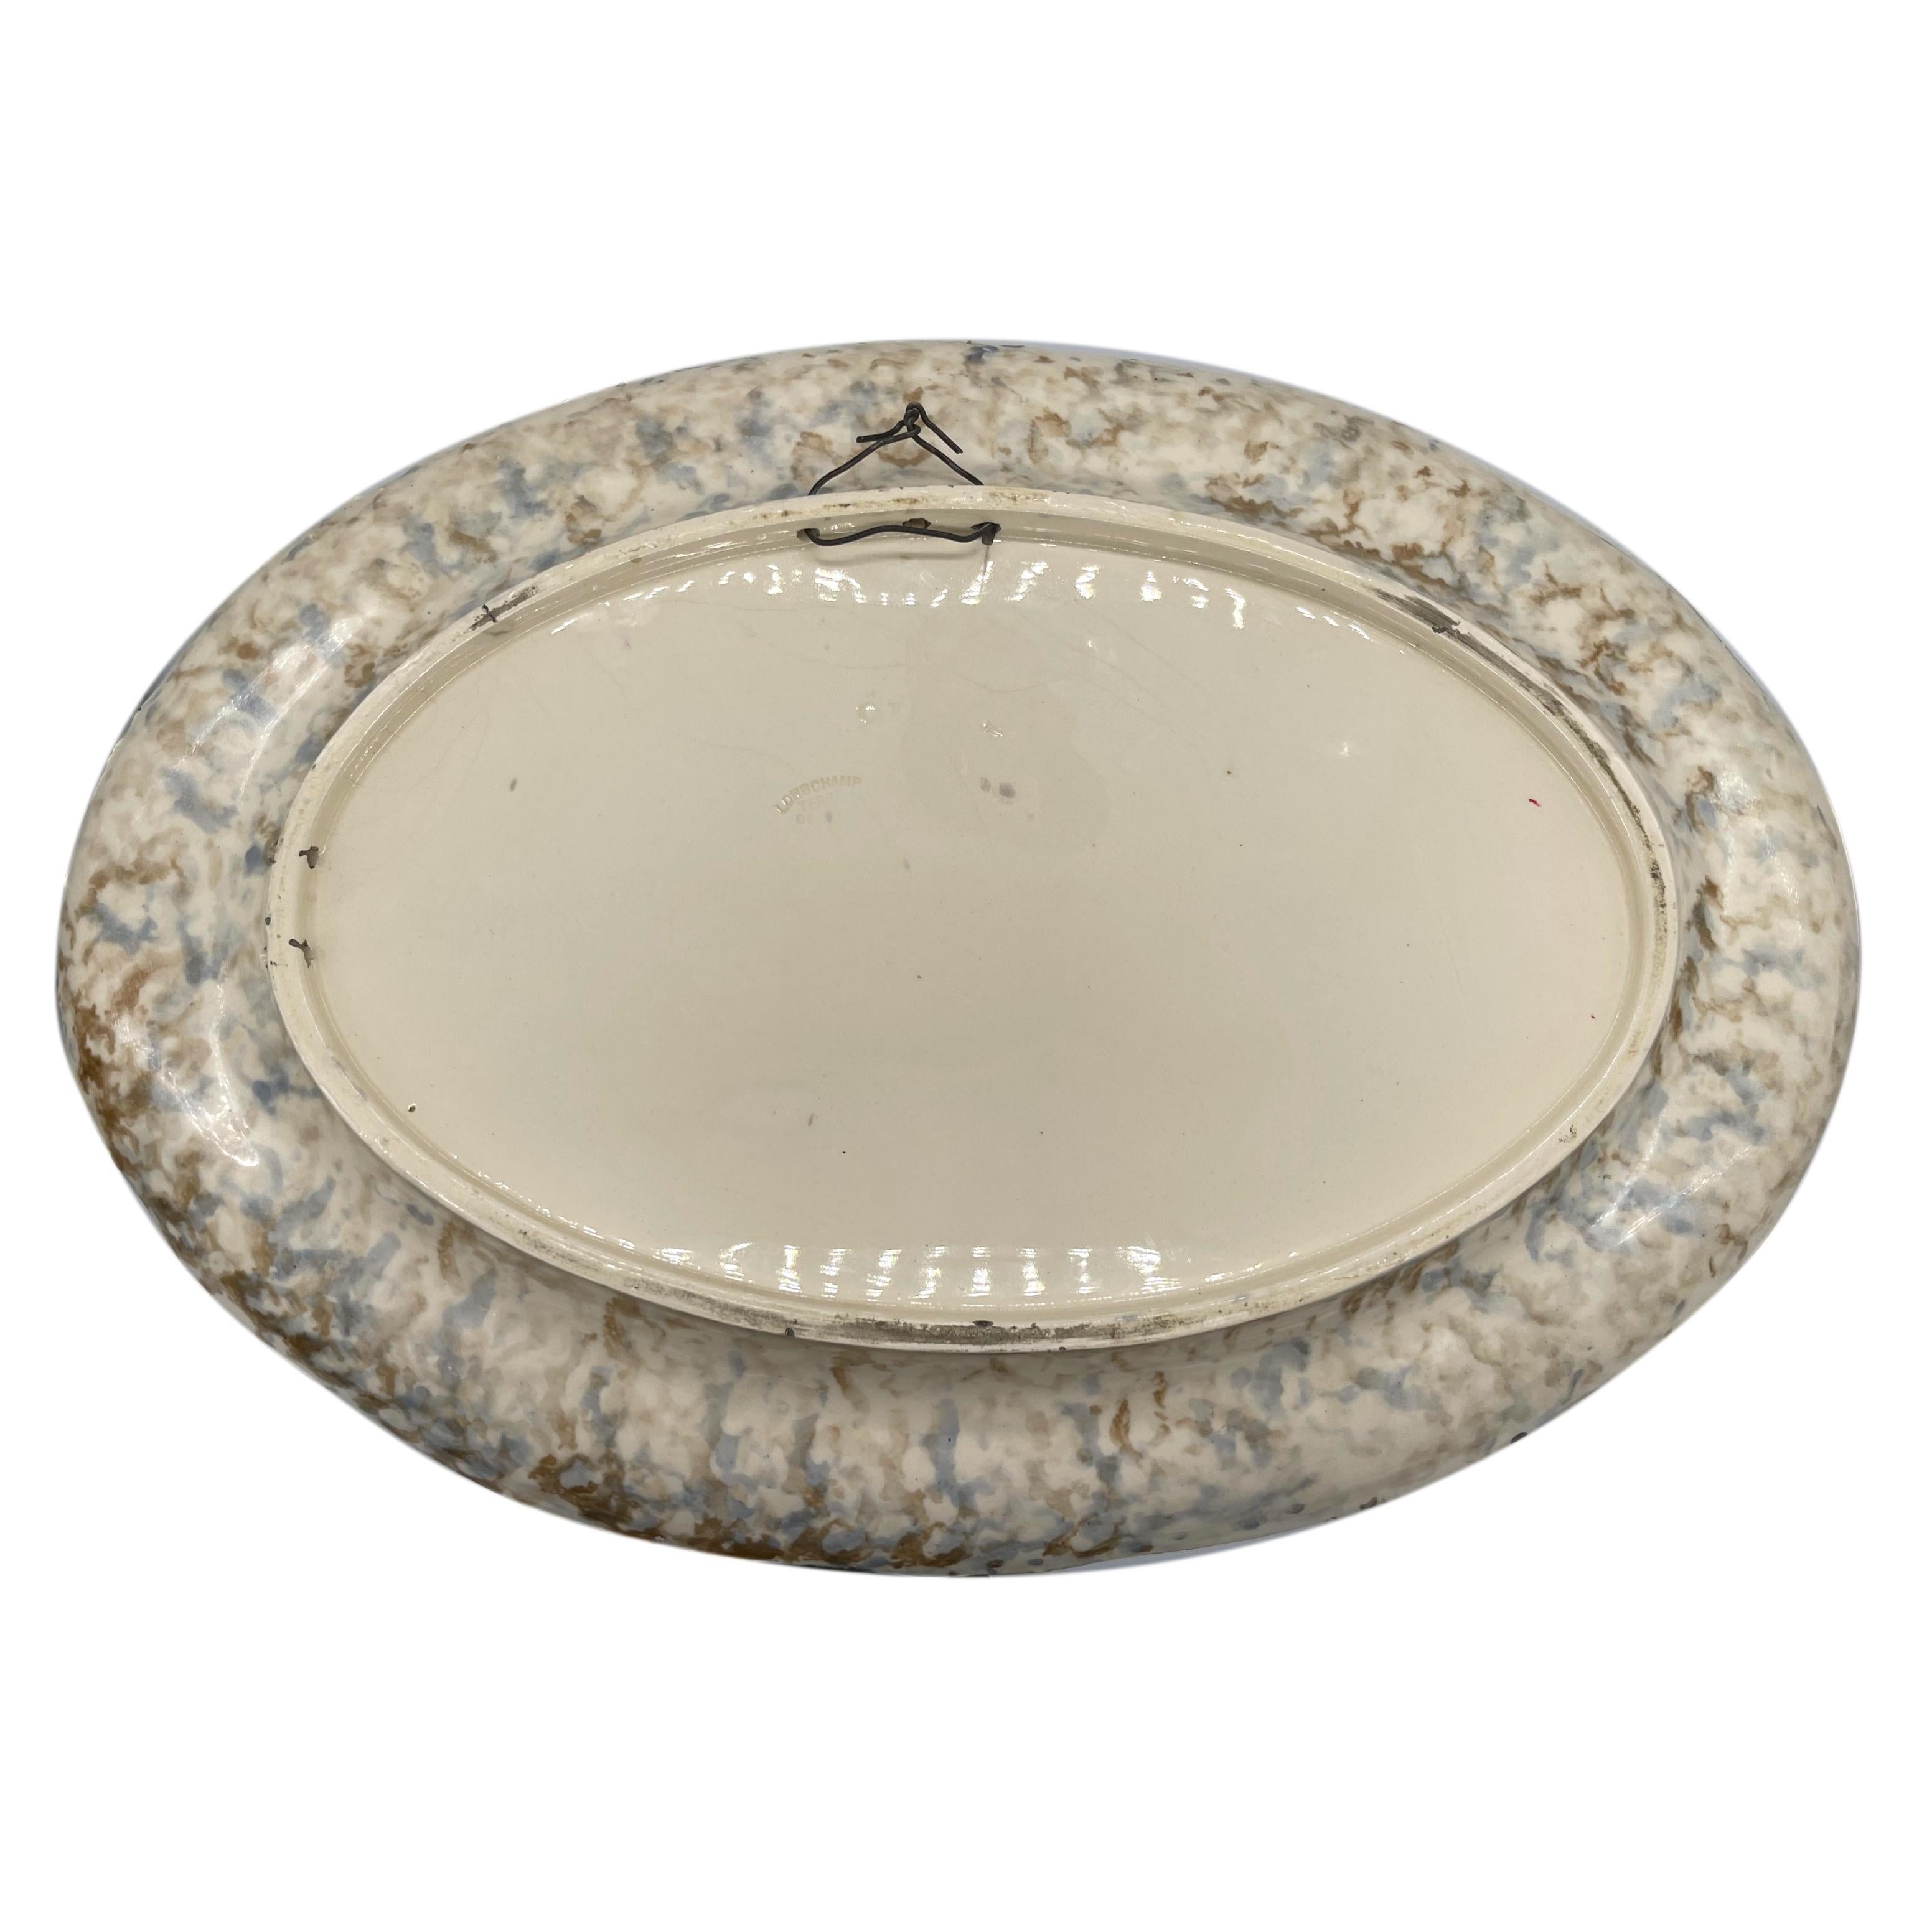 Palissy Ware Trompe L'oeil Oval Platter, Signed Longchamp, French, ca. 1875 For Sale 10